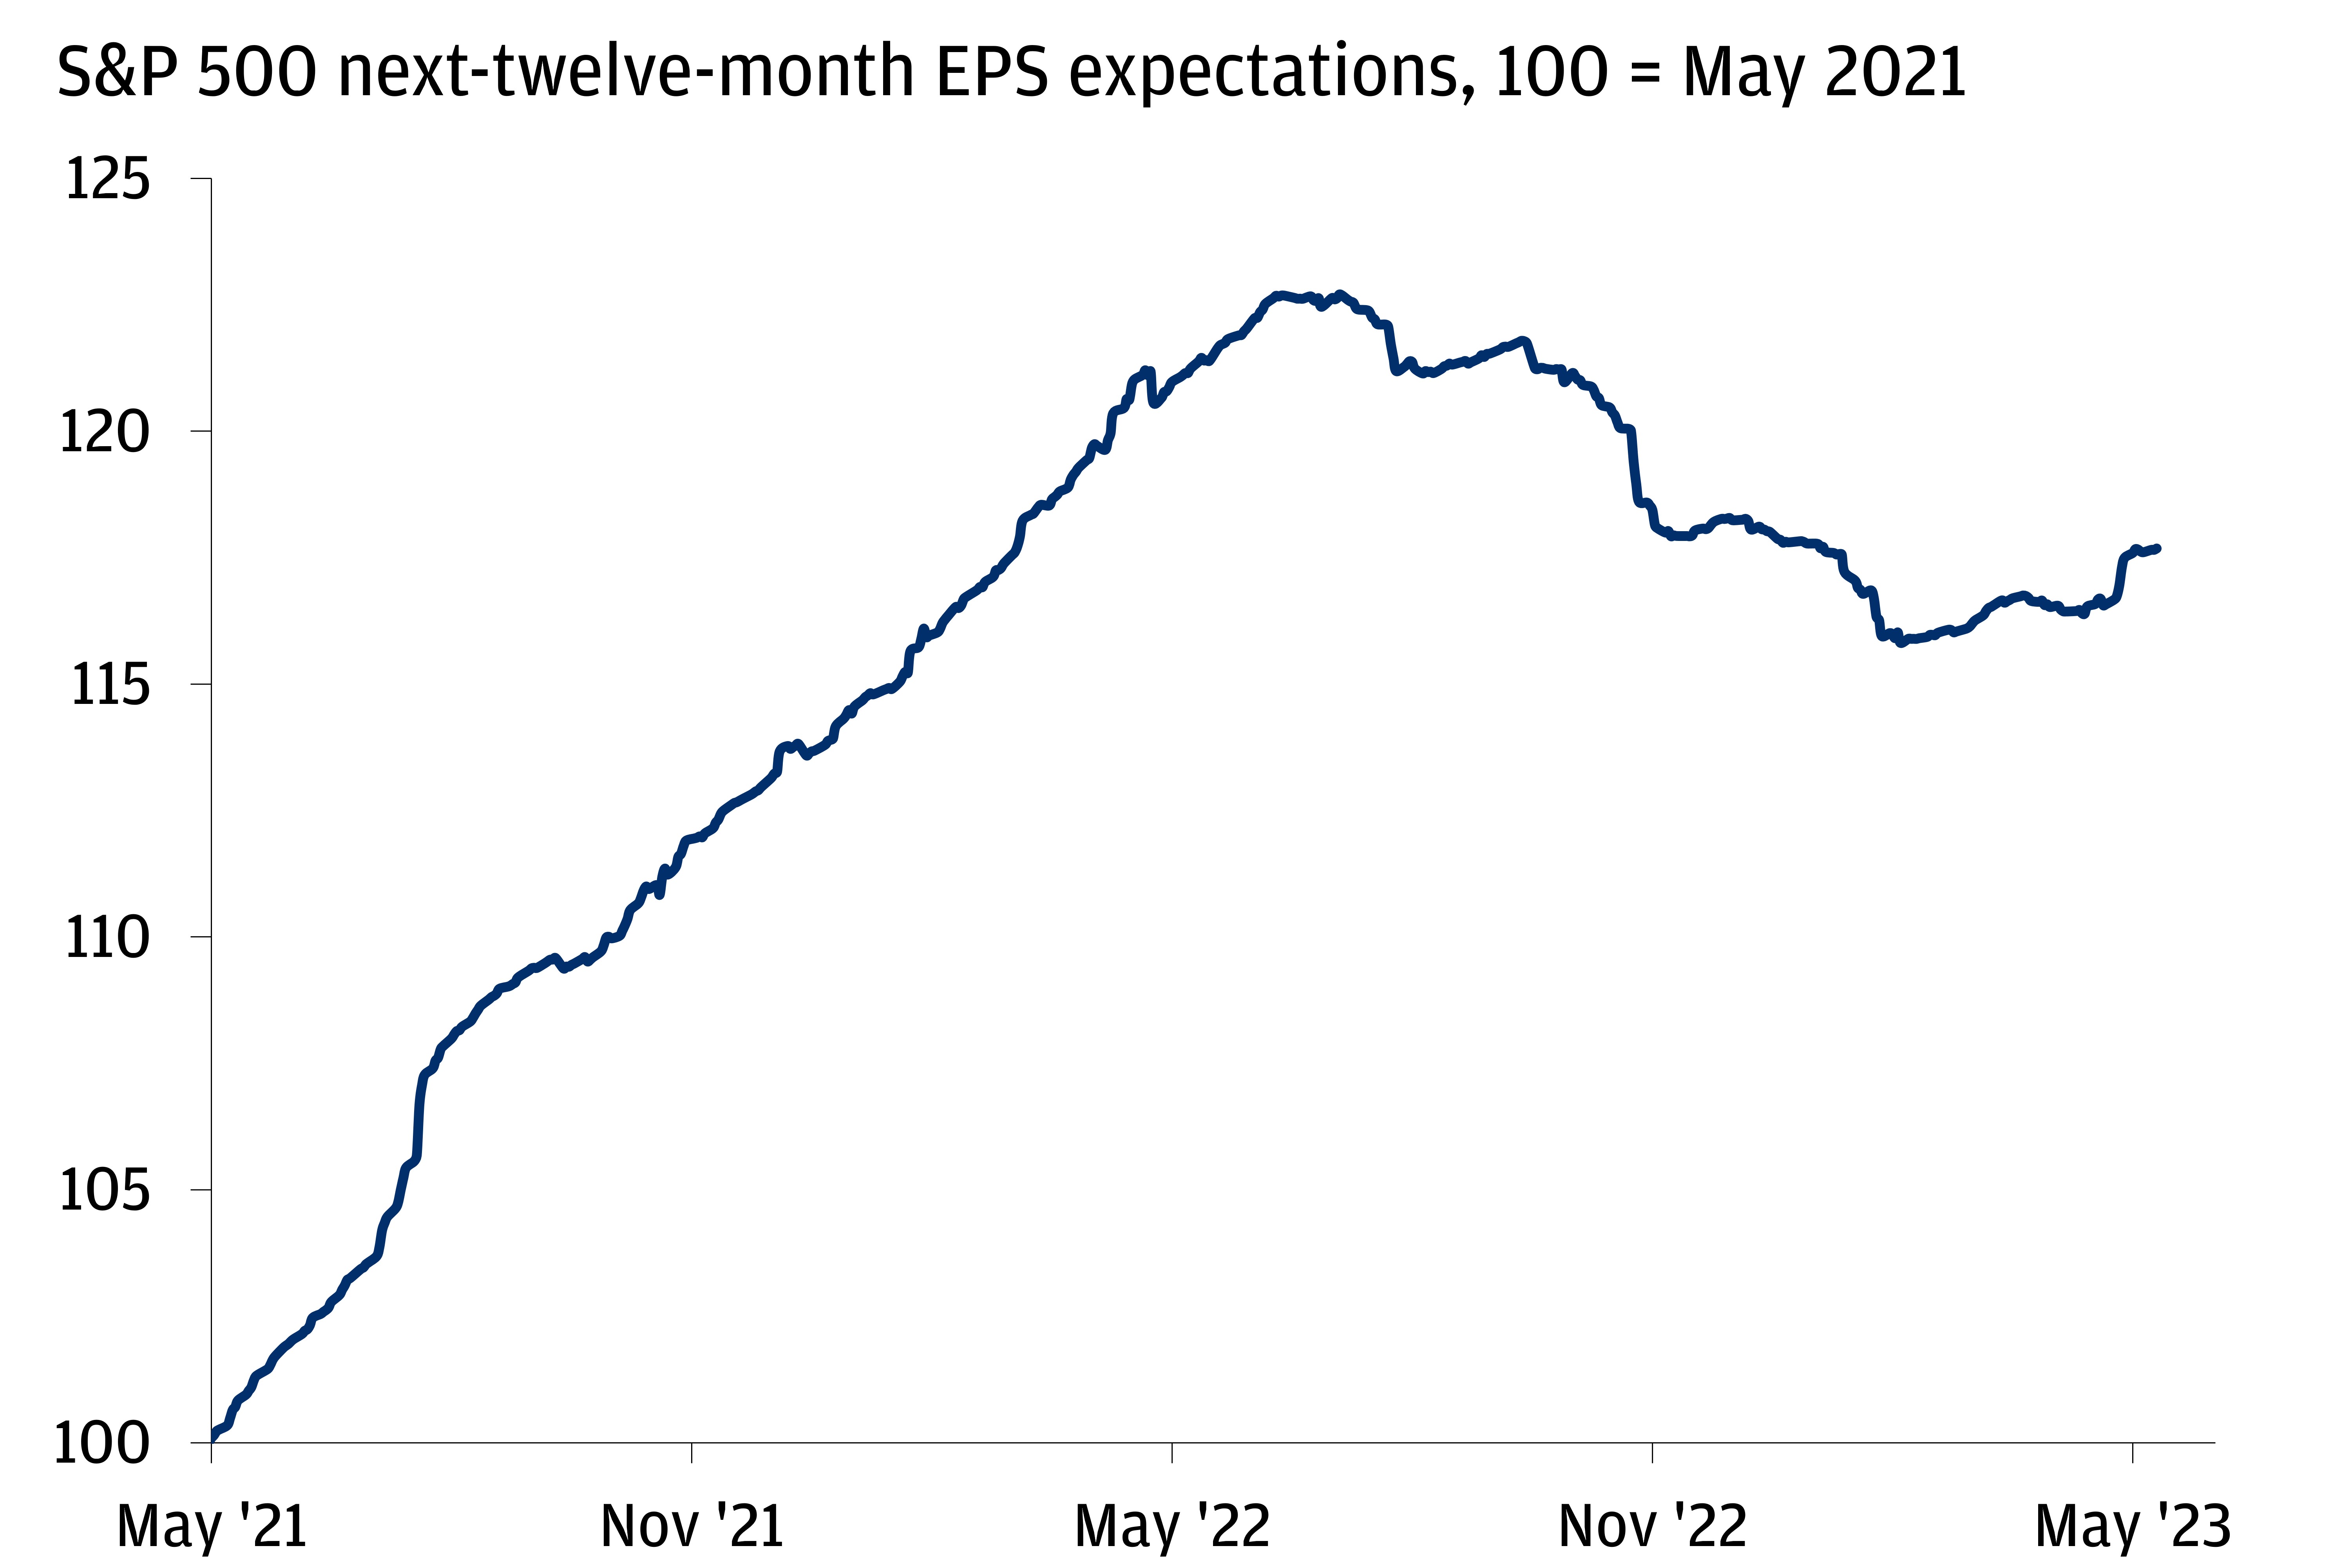 The chart describes earnings expectations in the United States indexed at 100 = May 2022 using S&P 500 next-12-month EPS expectations.